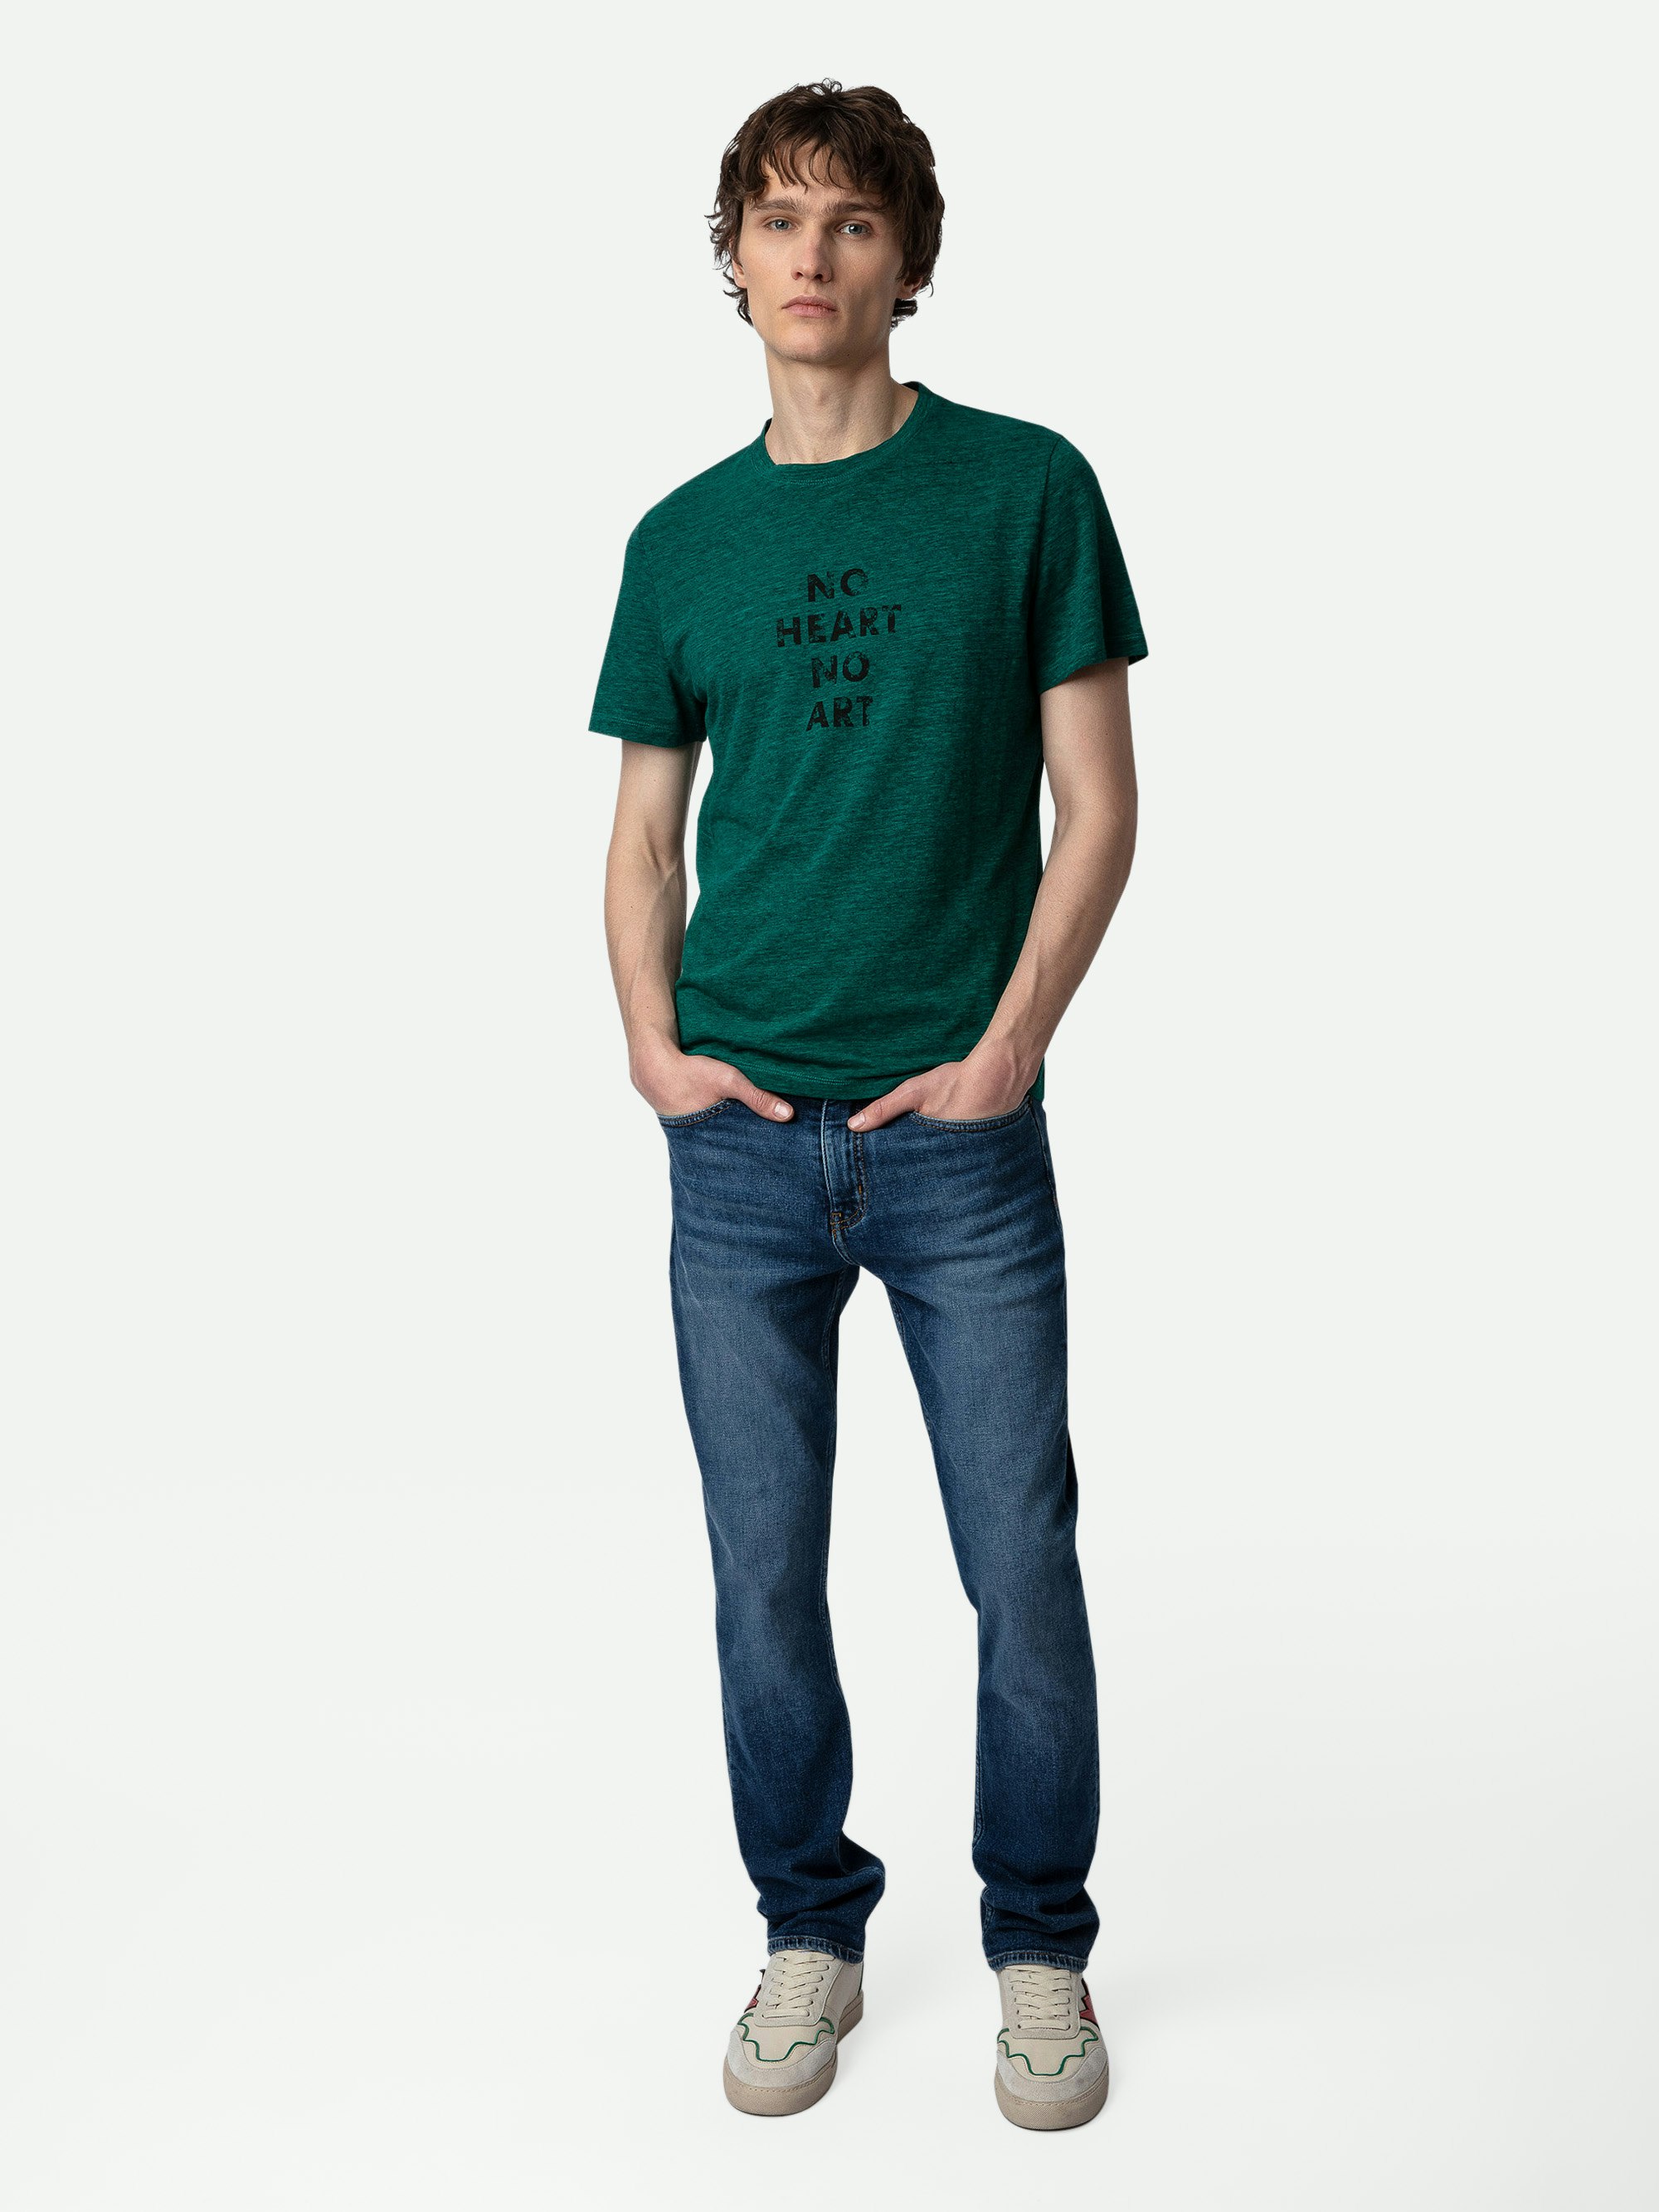 Tommy T-shirt - Blue green round-neck T-shirt with short sleeves and “No Heart No Art” print.